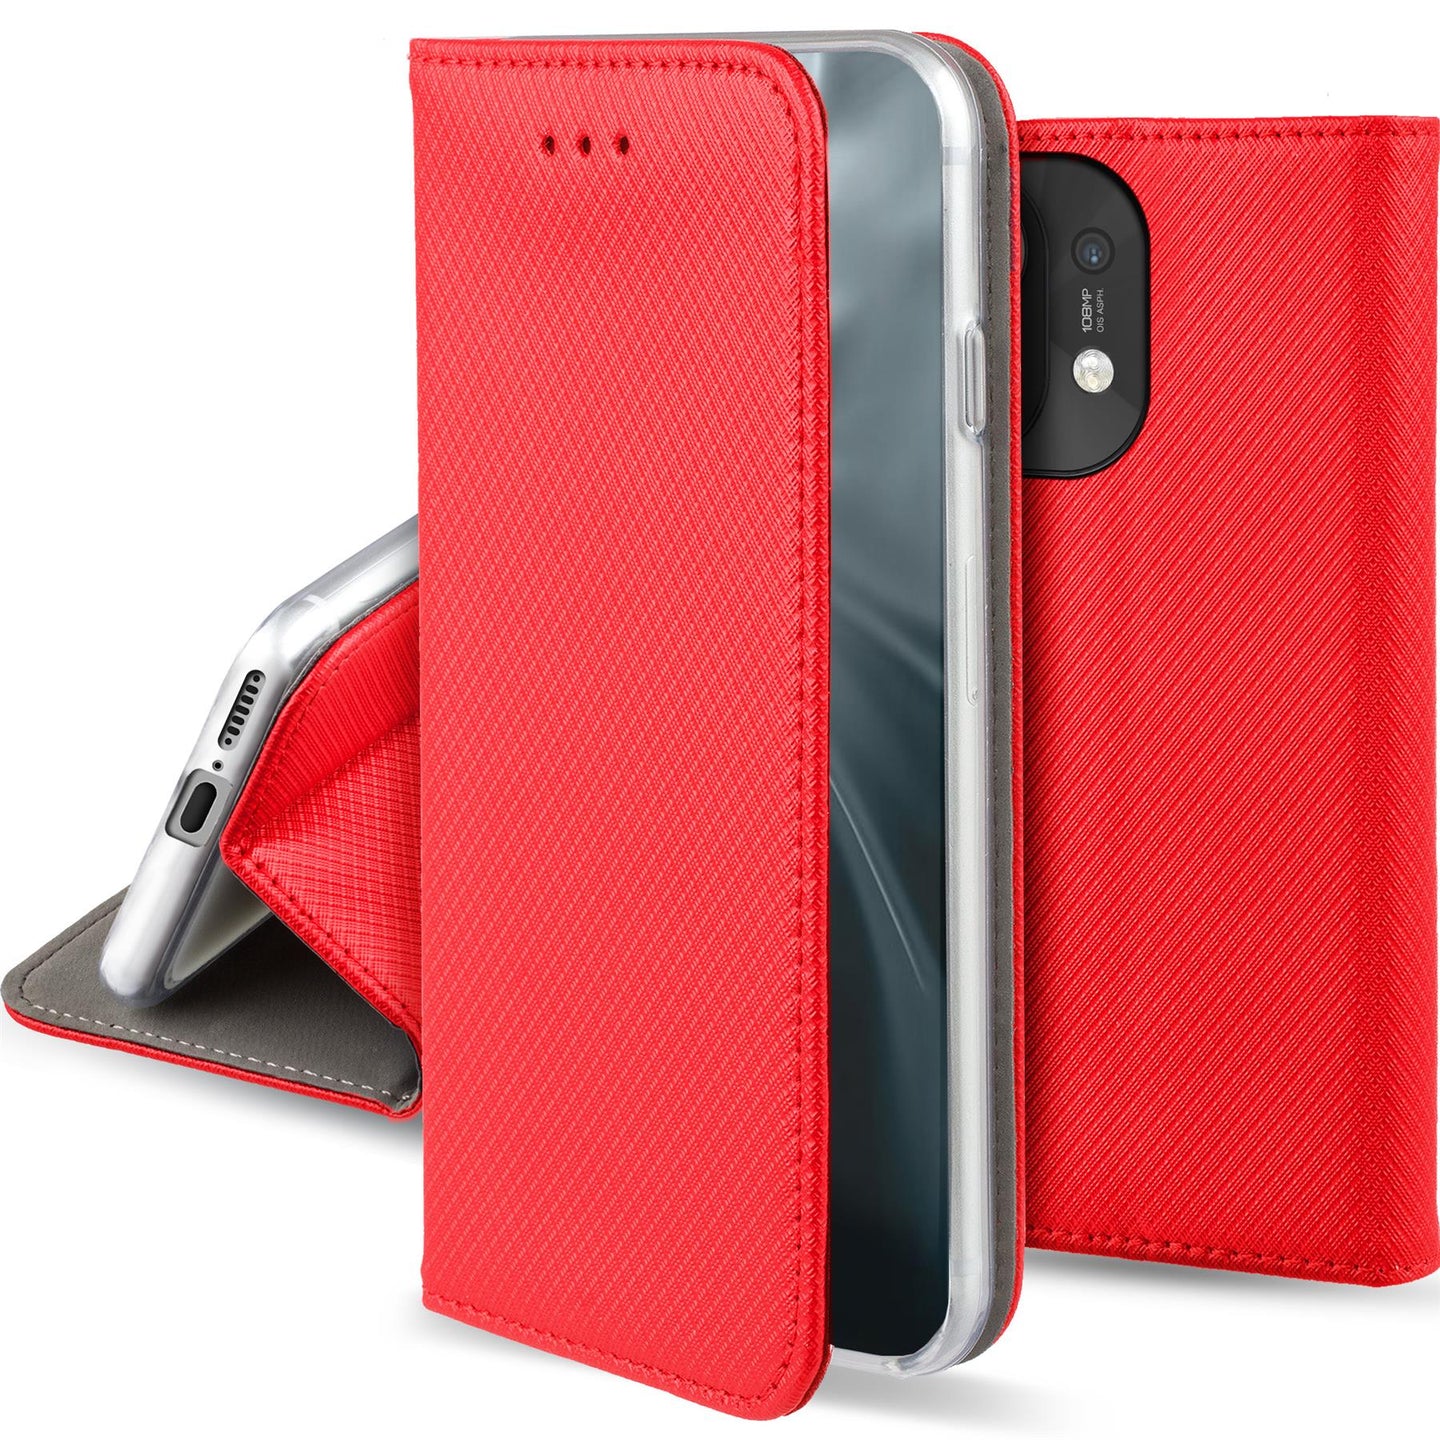 Moozy Case Flip Cover for Xiaomi Mi 11, Red - Smart Magnetic Flip Case Flip Folio Wallet Case with Card Holder and Stand, Credit Card Slots10,99